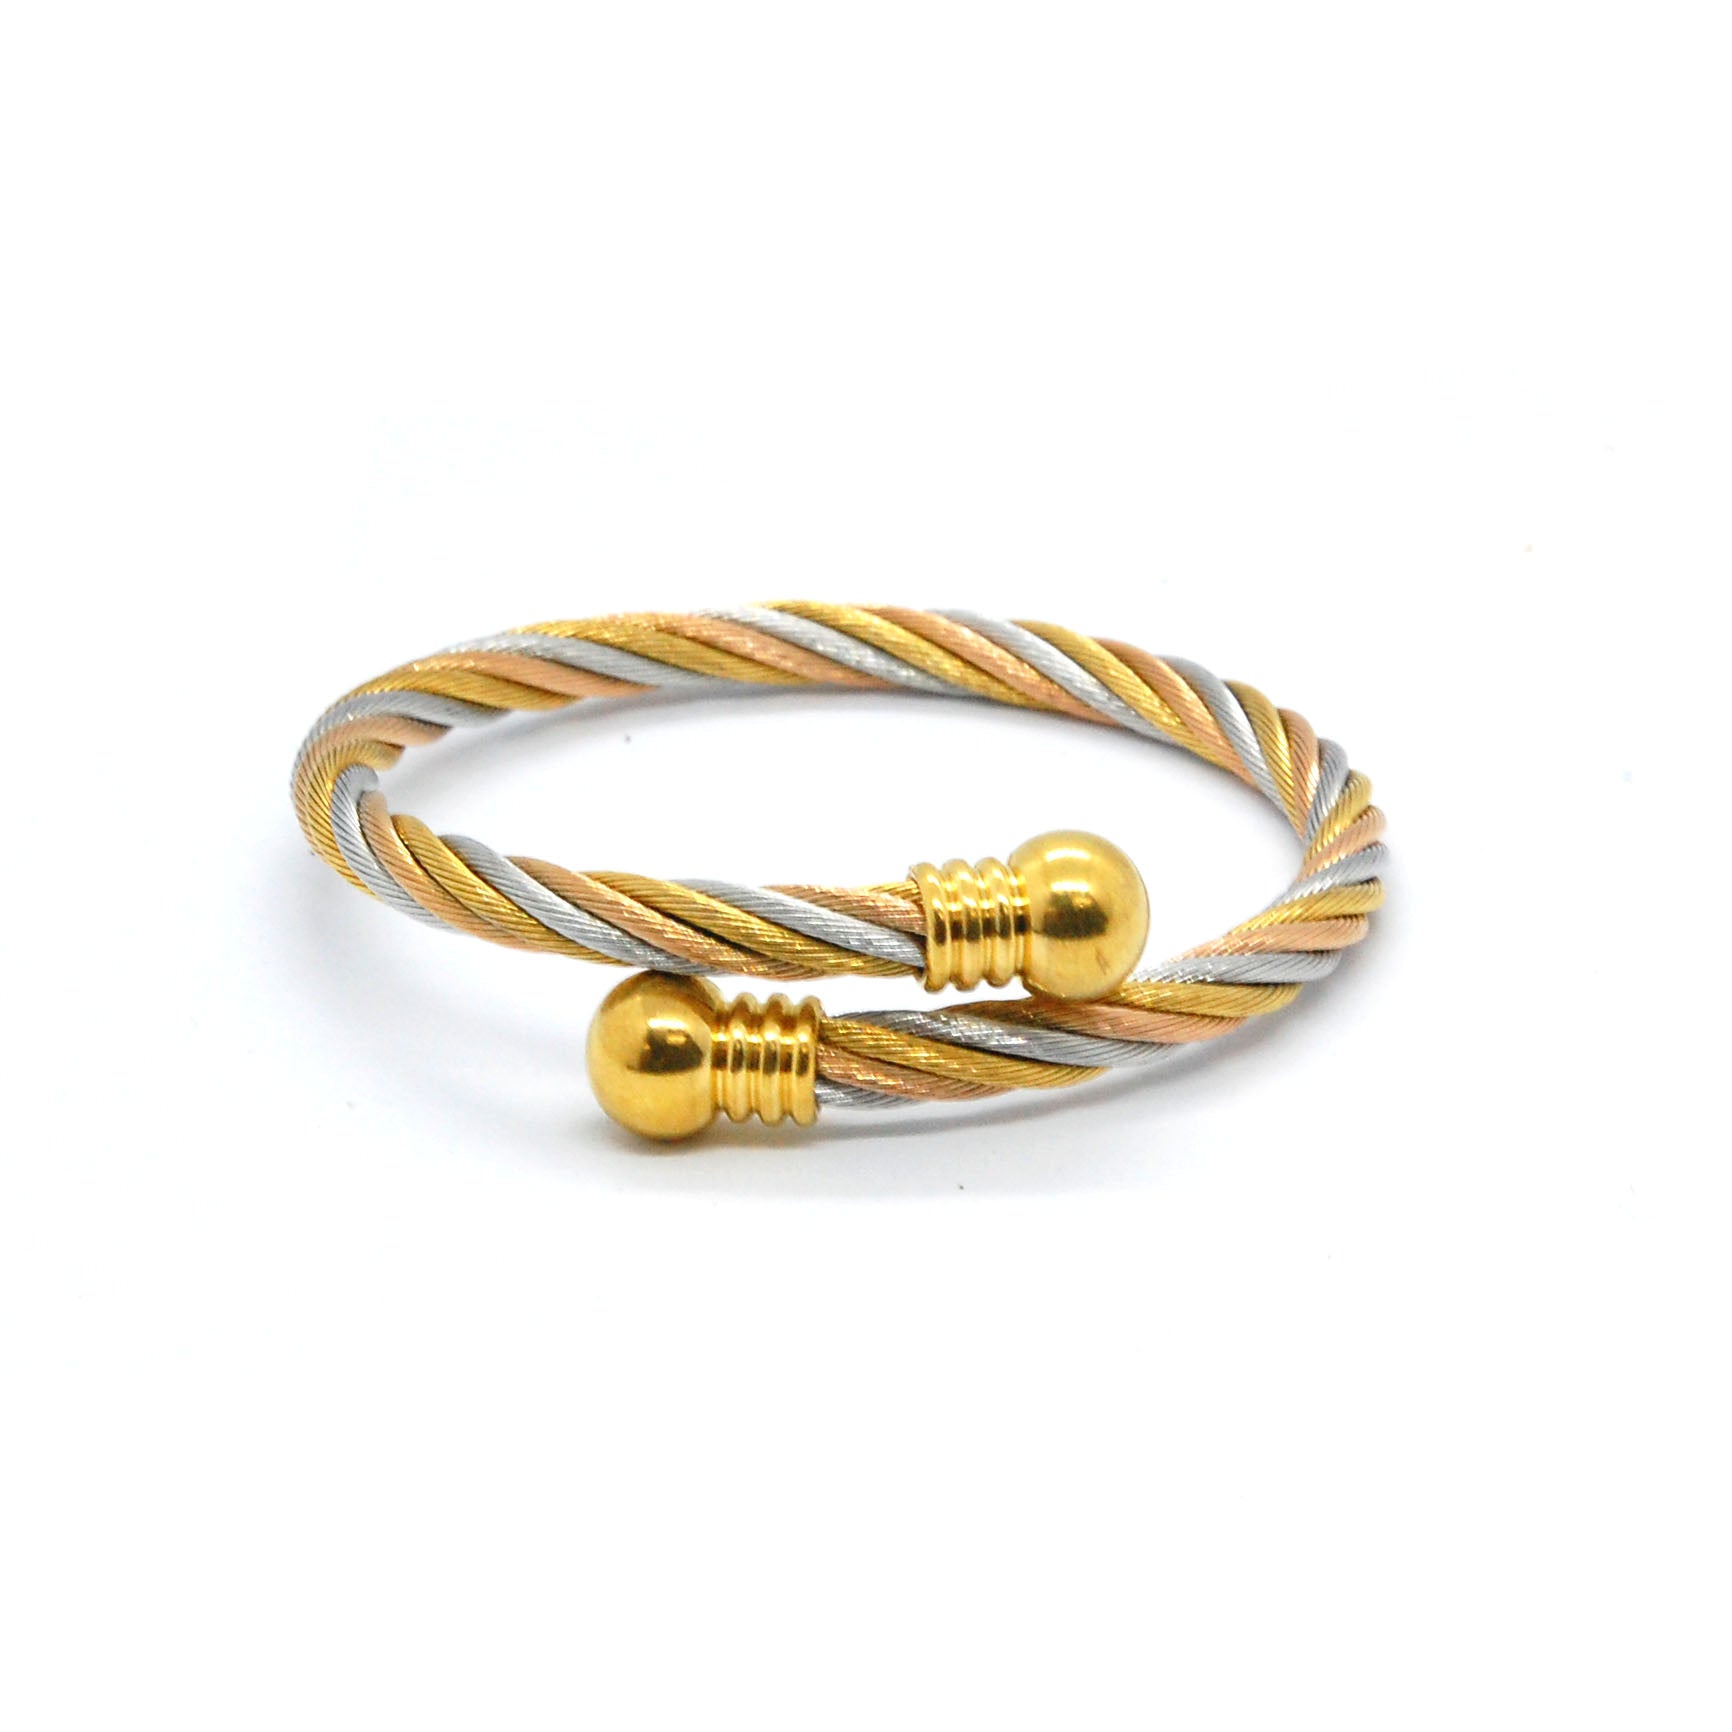 ESBG 7856: 3-Tone Twisted Charriol Bangle w/ Gold Plated Round Ends